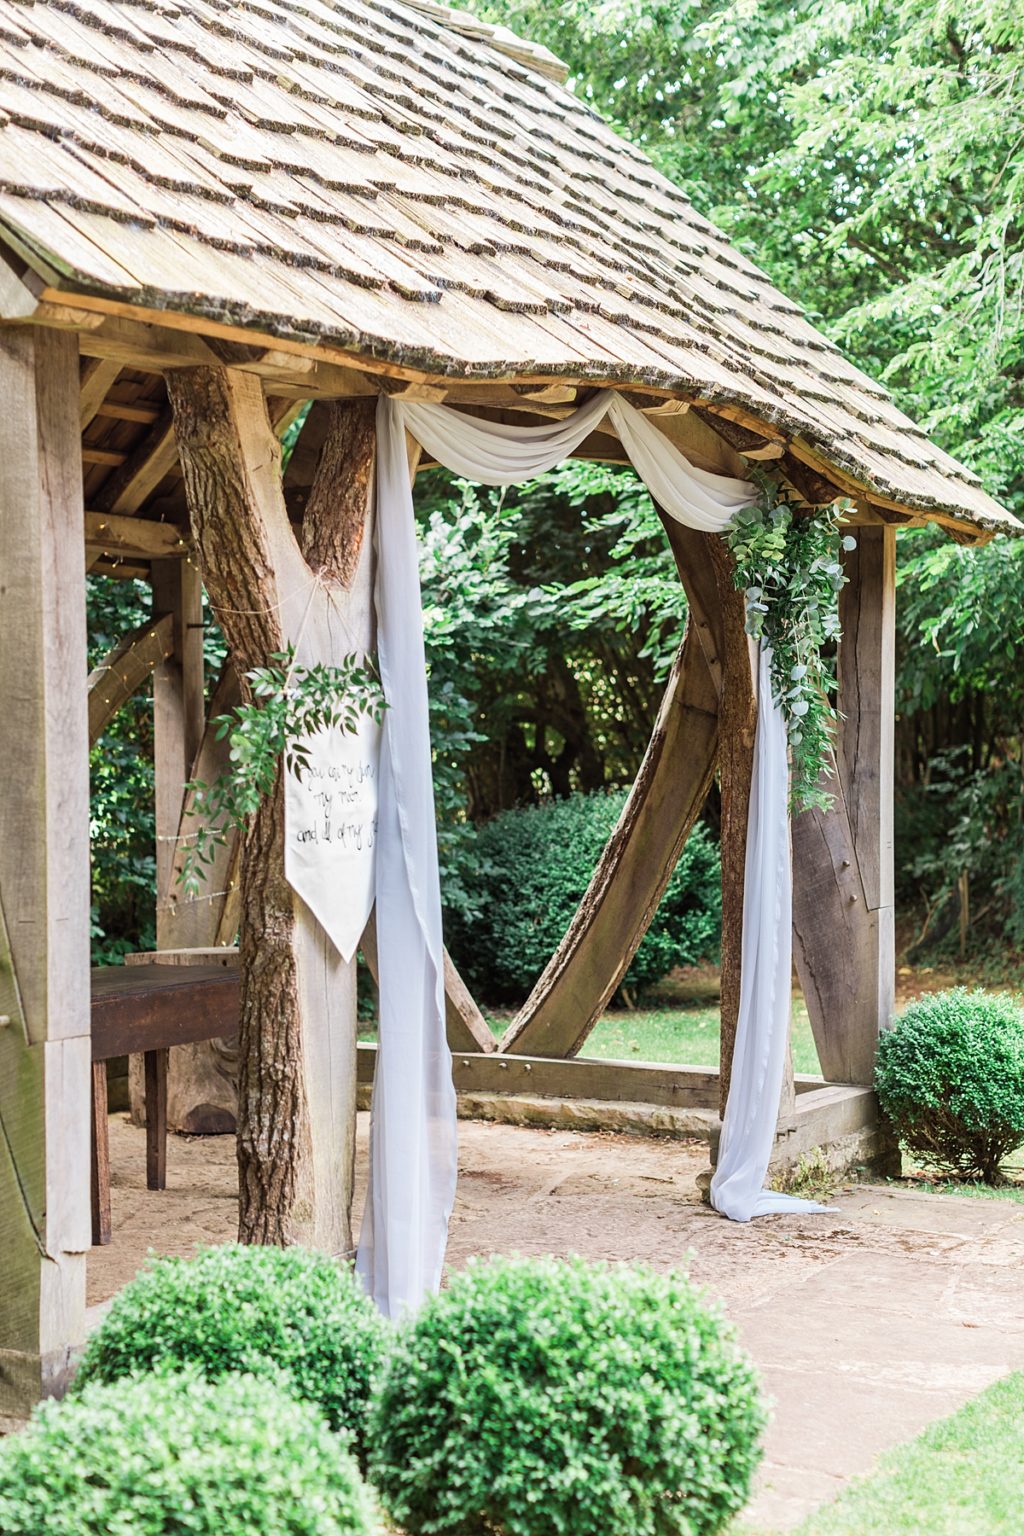 How to create a relaxed, rustic back garden wedding